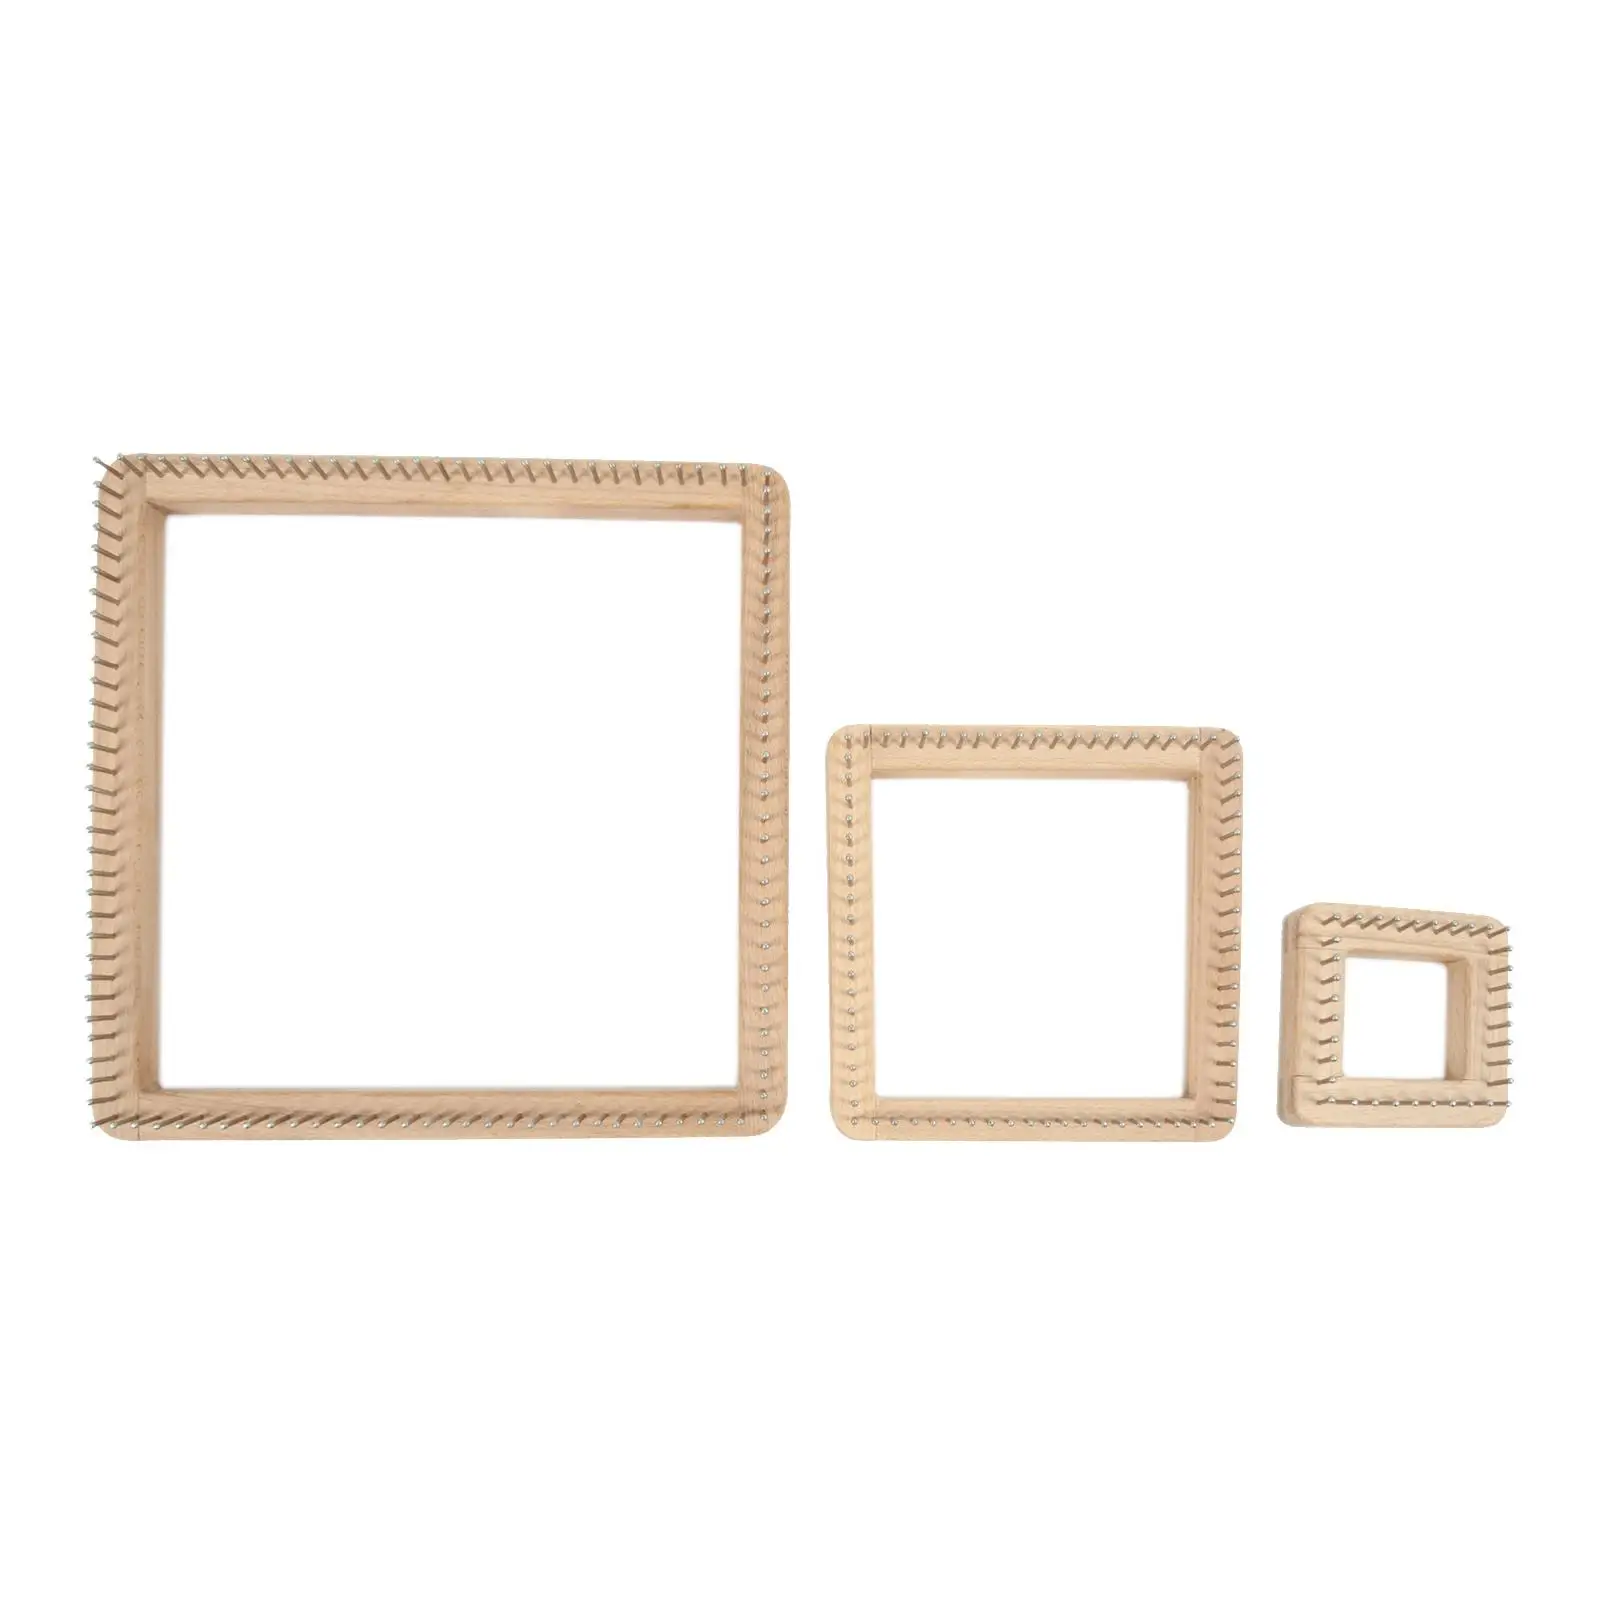 Square Knitting Loom Wooden Handcrafts Needlework Board DIY Pegs Accessories Multifunctional for Bags Sock Yarn Toys Children